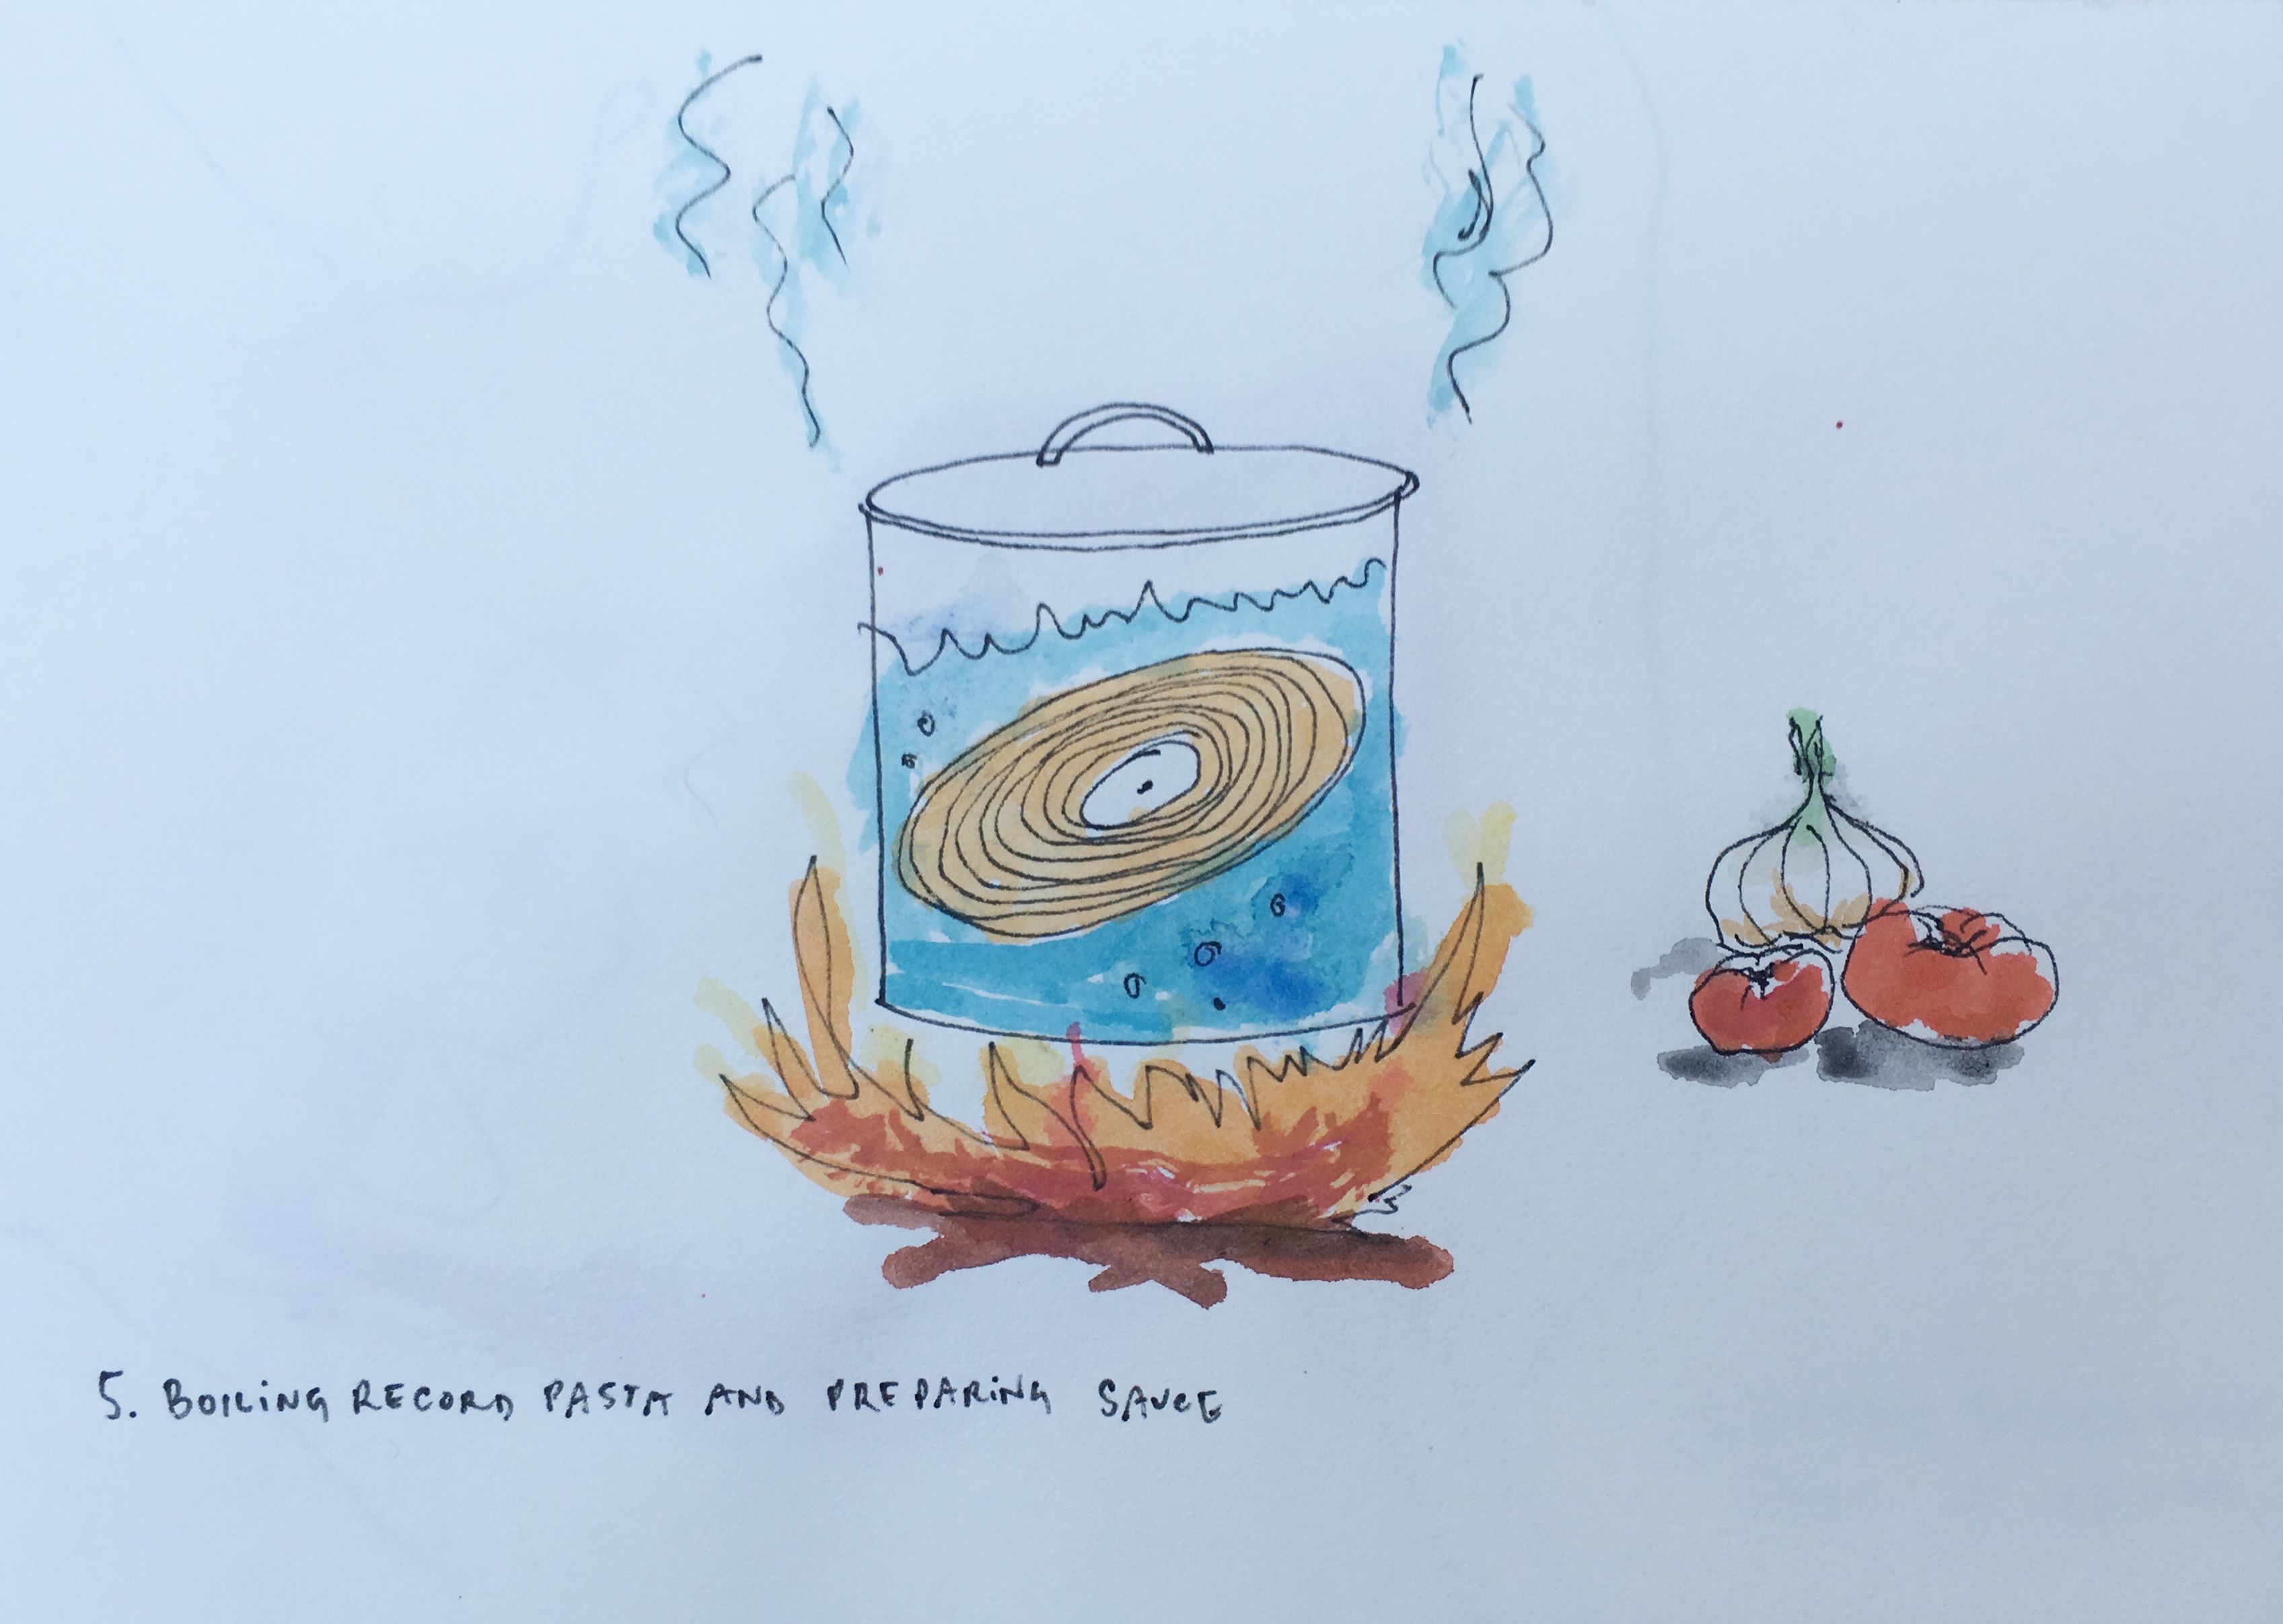 Concept color drawing of boiling record pasta and preparing sauce for PPKK 05.00 by Sarah Ancelle Schoenfeld and Louis-Philippe Scoufaras